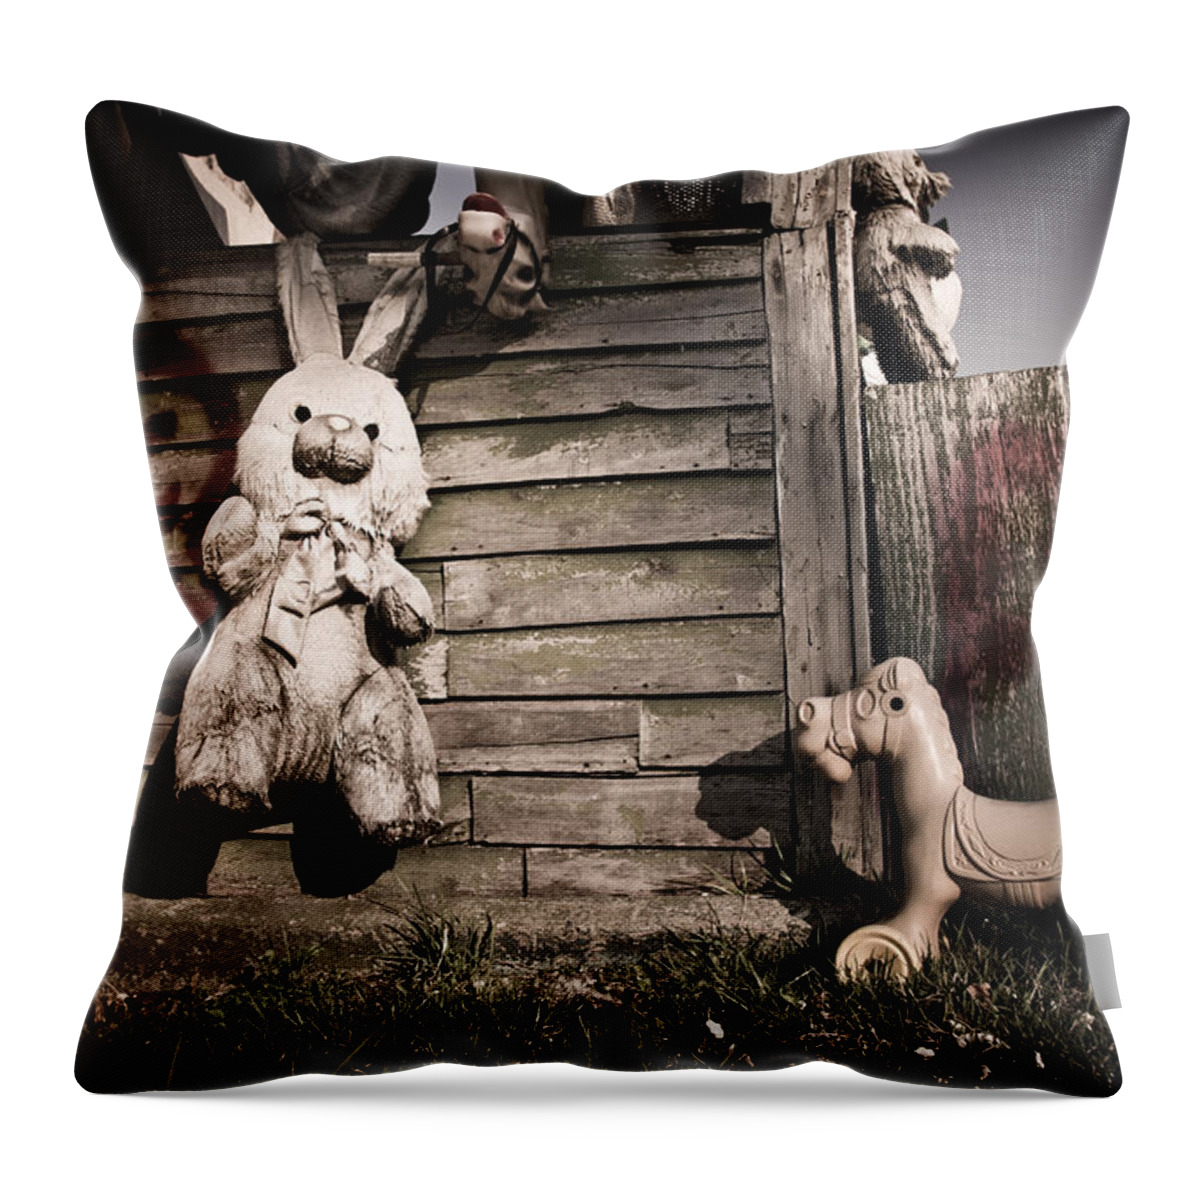  Throw Pillow featuring the photograph Old Friends by Priya Ghose